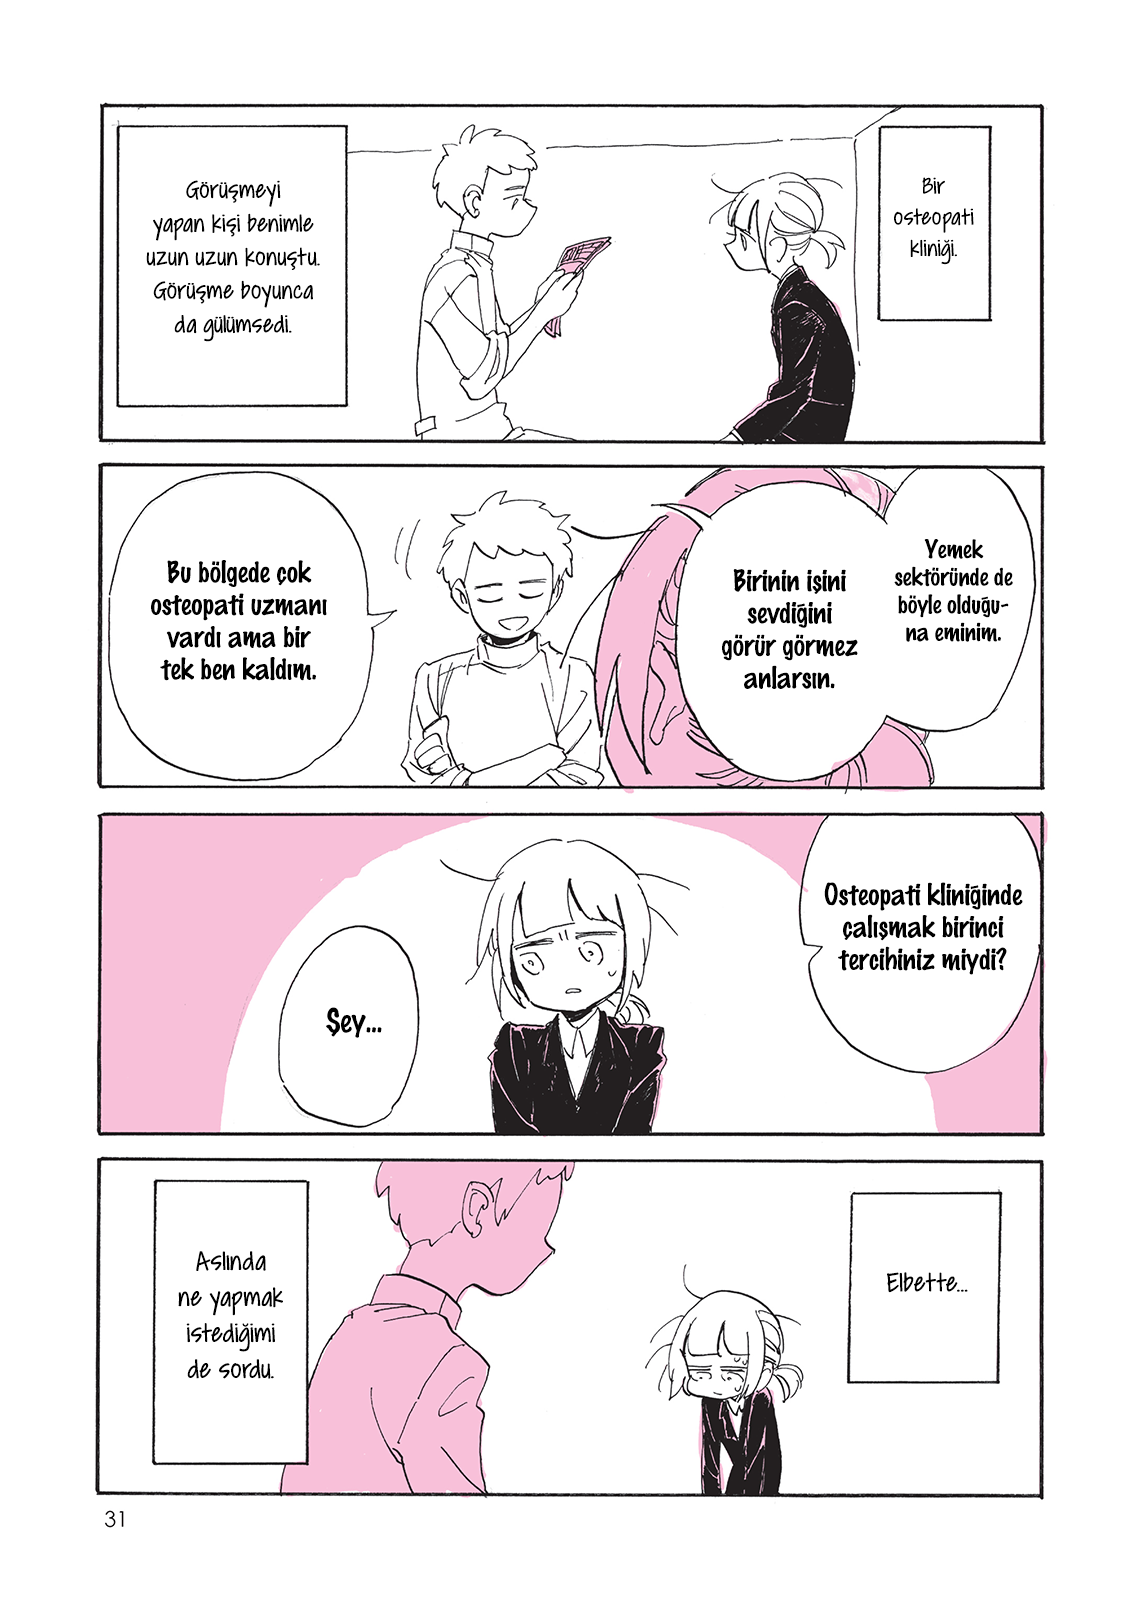 my lesbian experience with loneliness manga